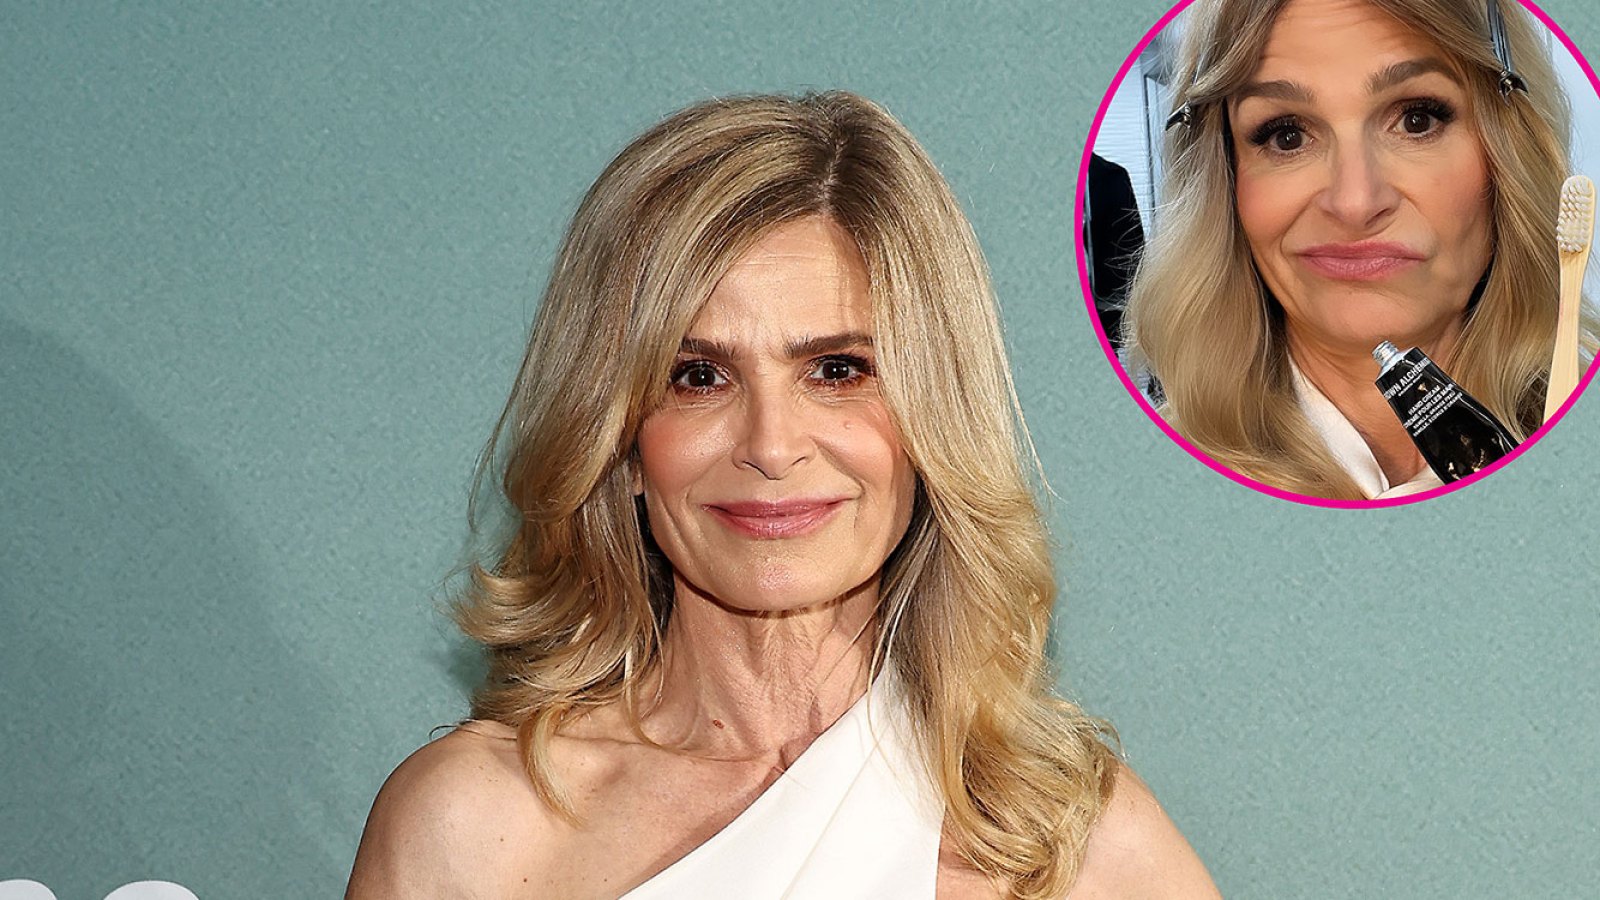 Kyra Sedgwick Accidentally Brushes Her Teeth With Hand Cream